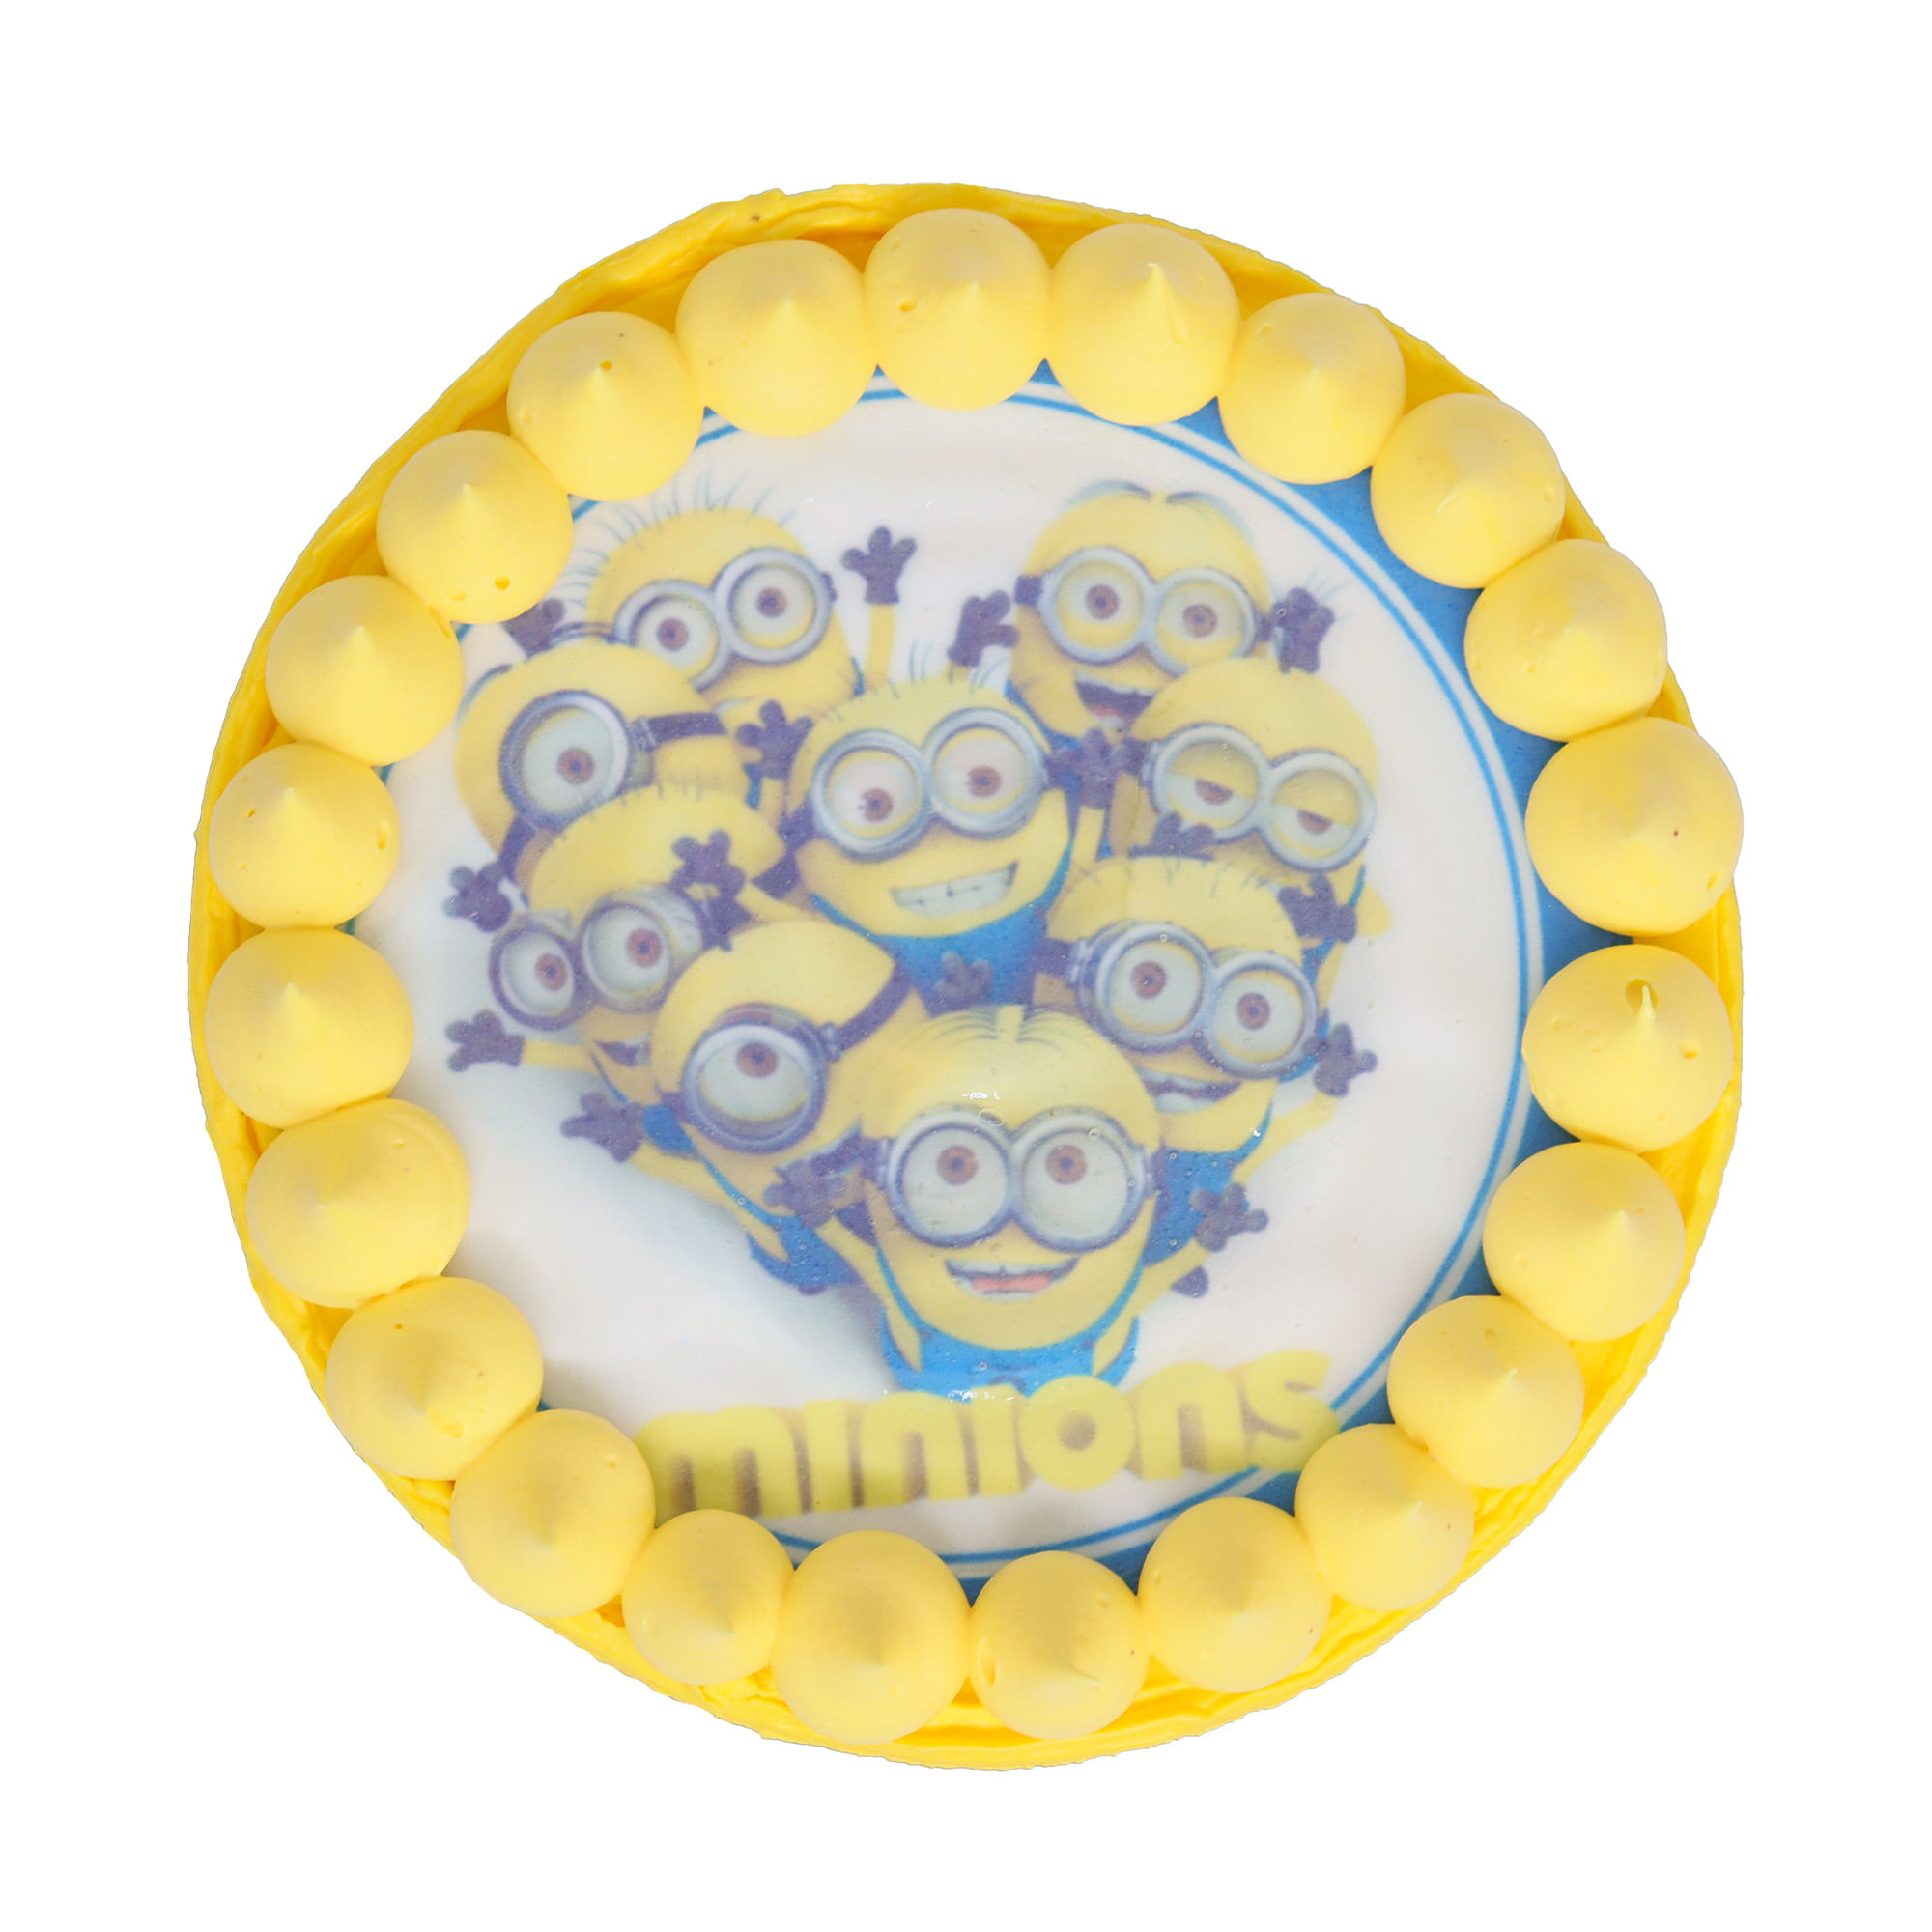 Minions Birthday Cake | Baked by Nataleen